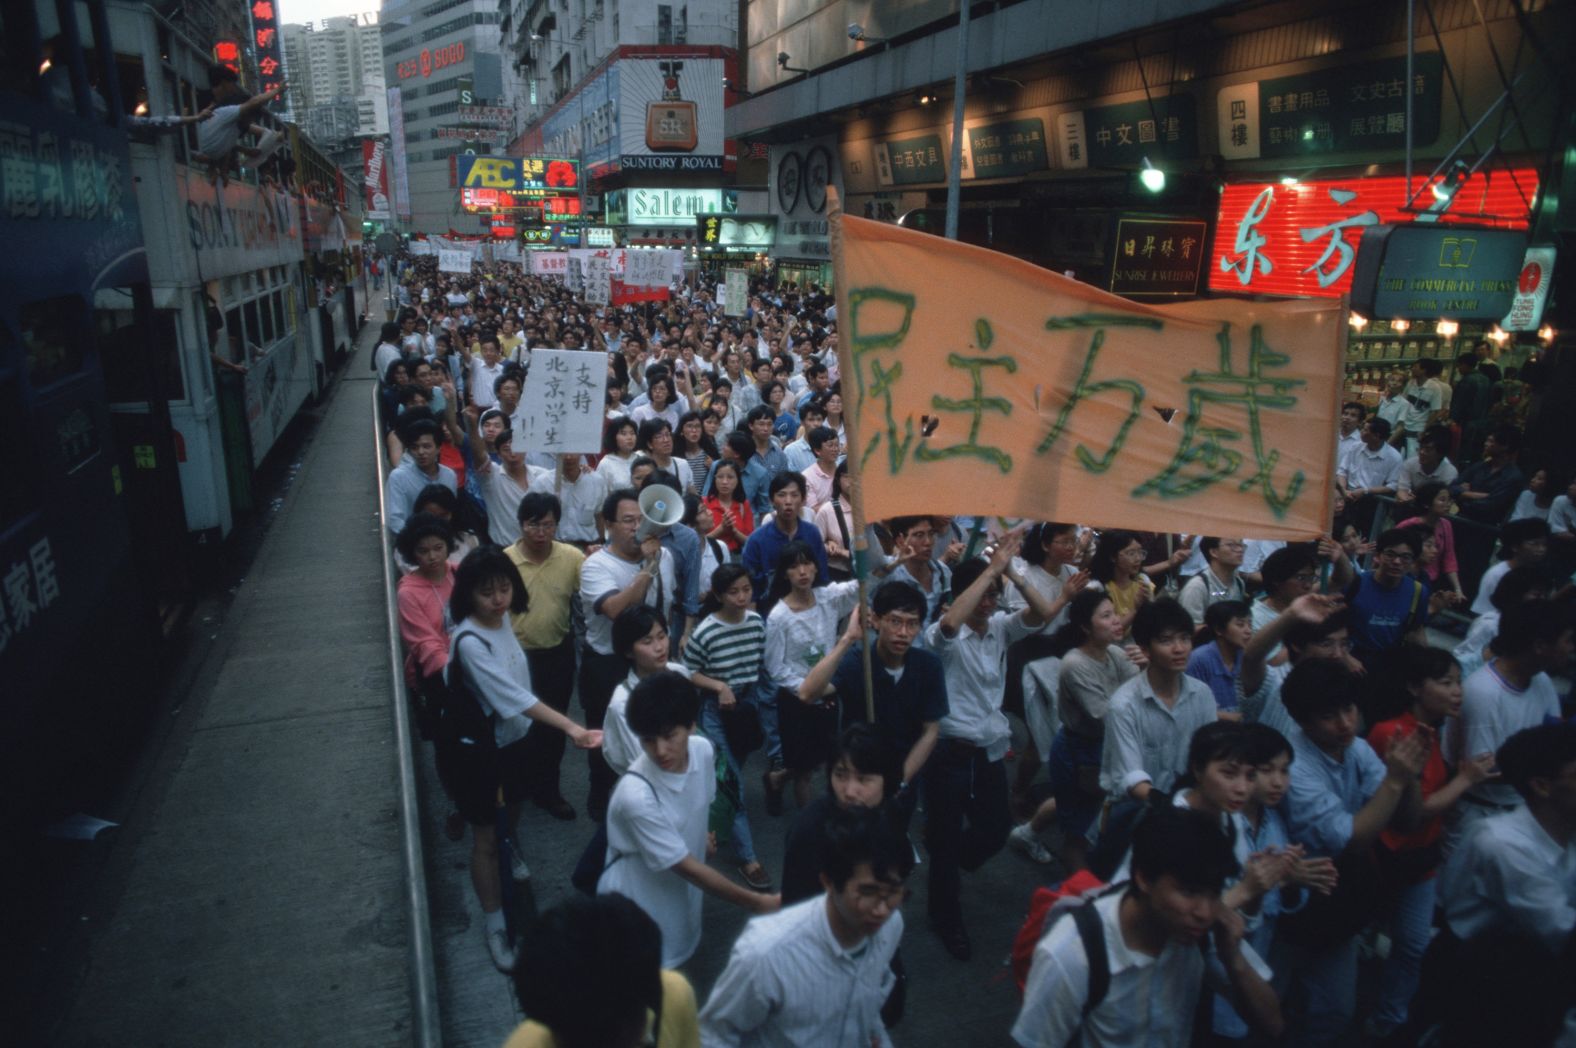 Pro-democracy demonstrators protest in Victoria Park to show solidarity with victims of the Tiananmen Square massacre in 1989.